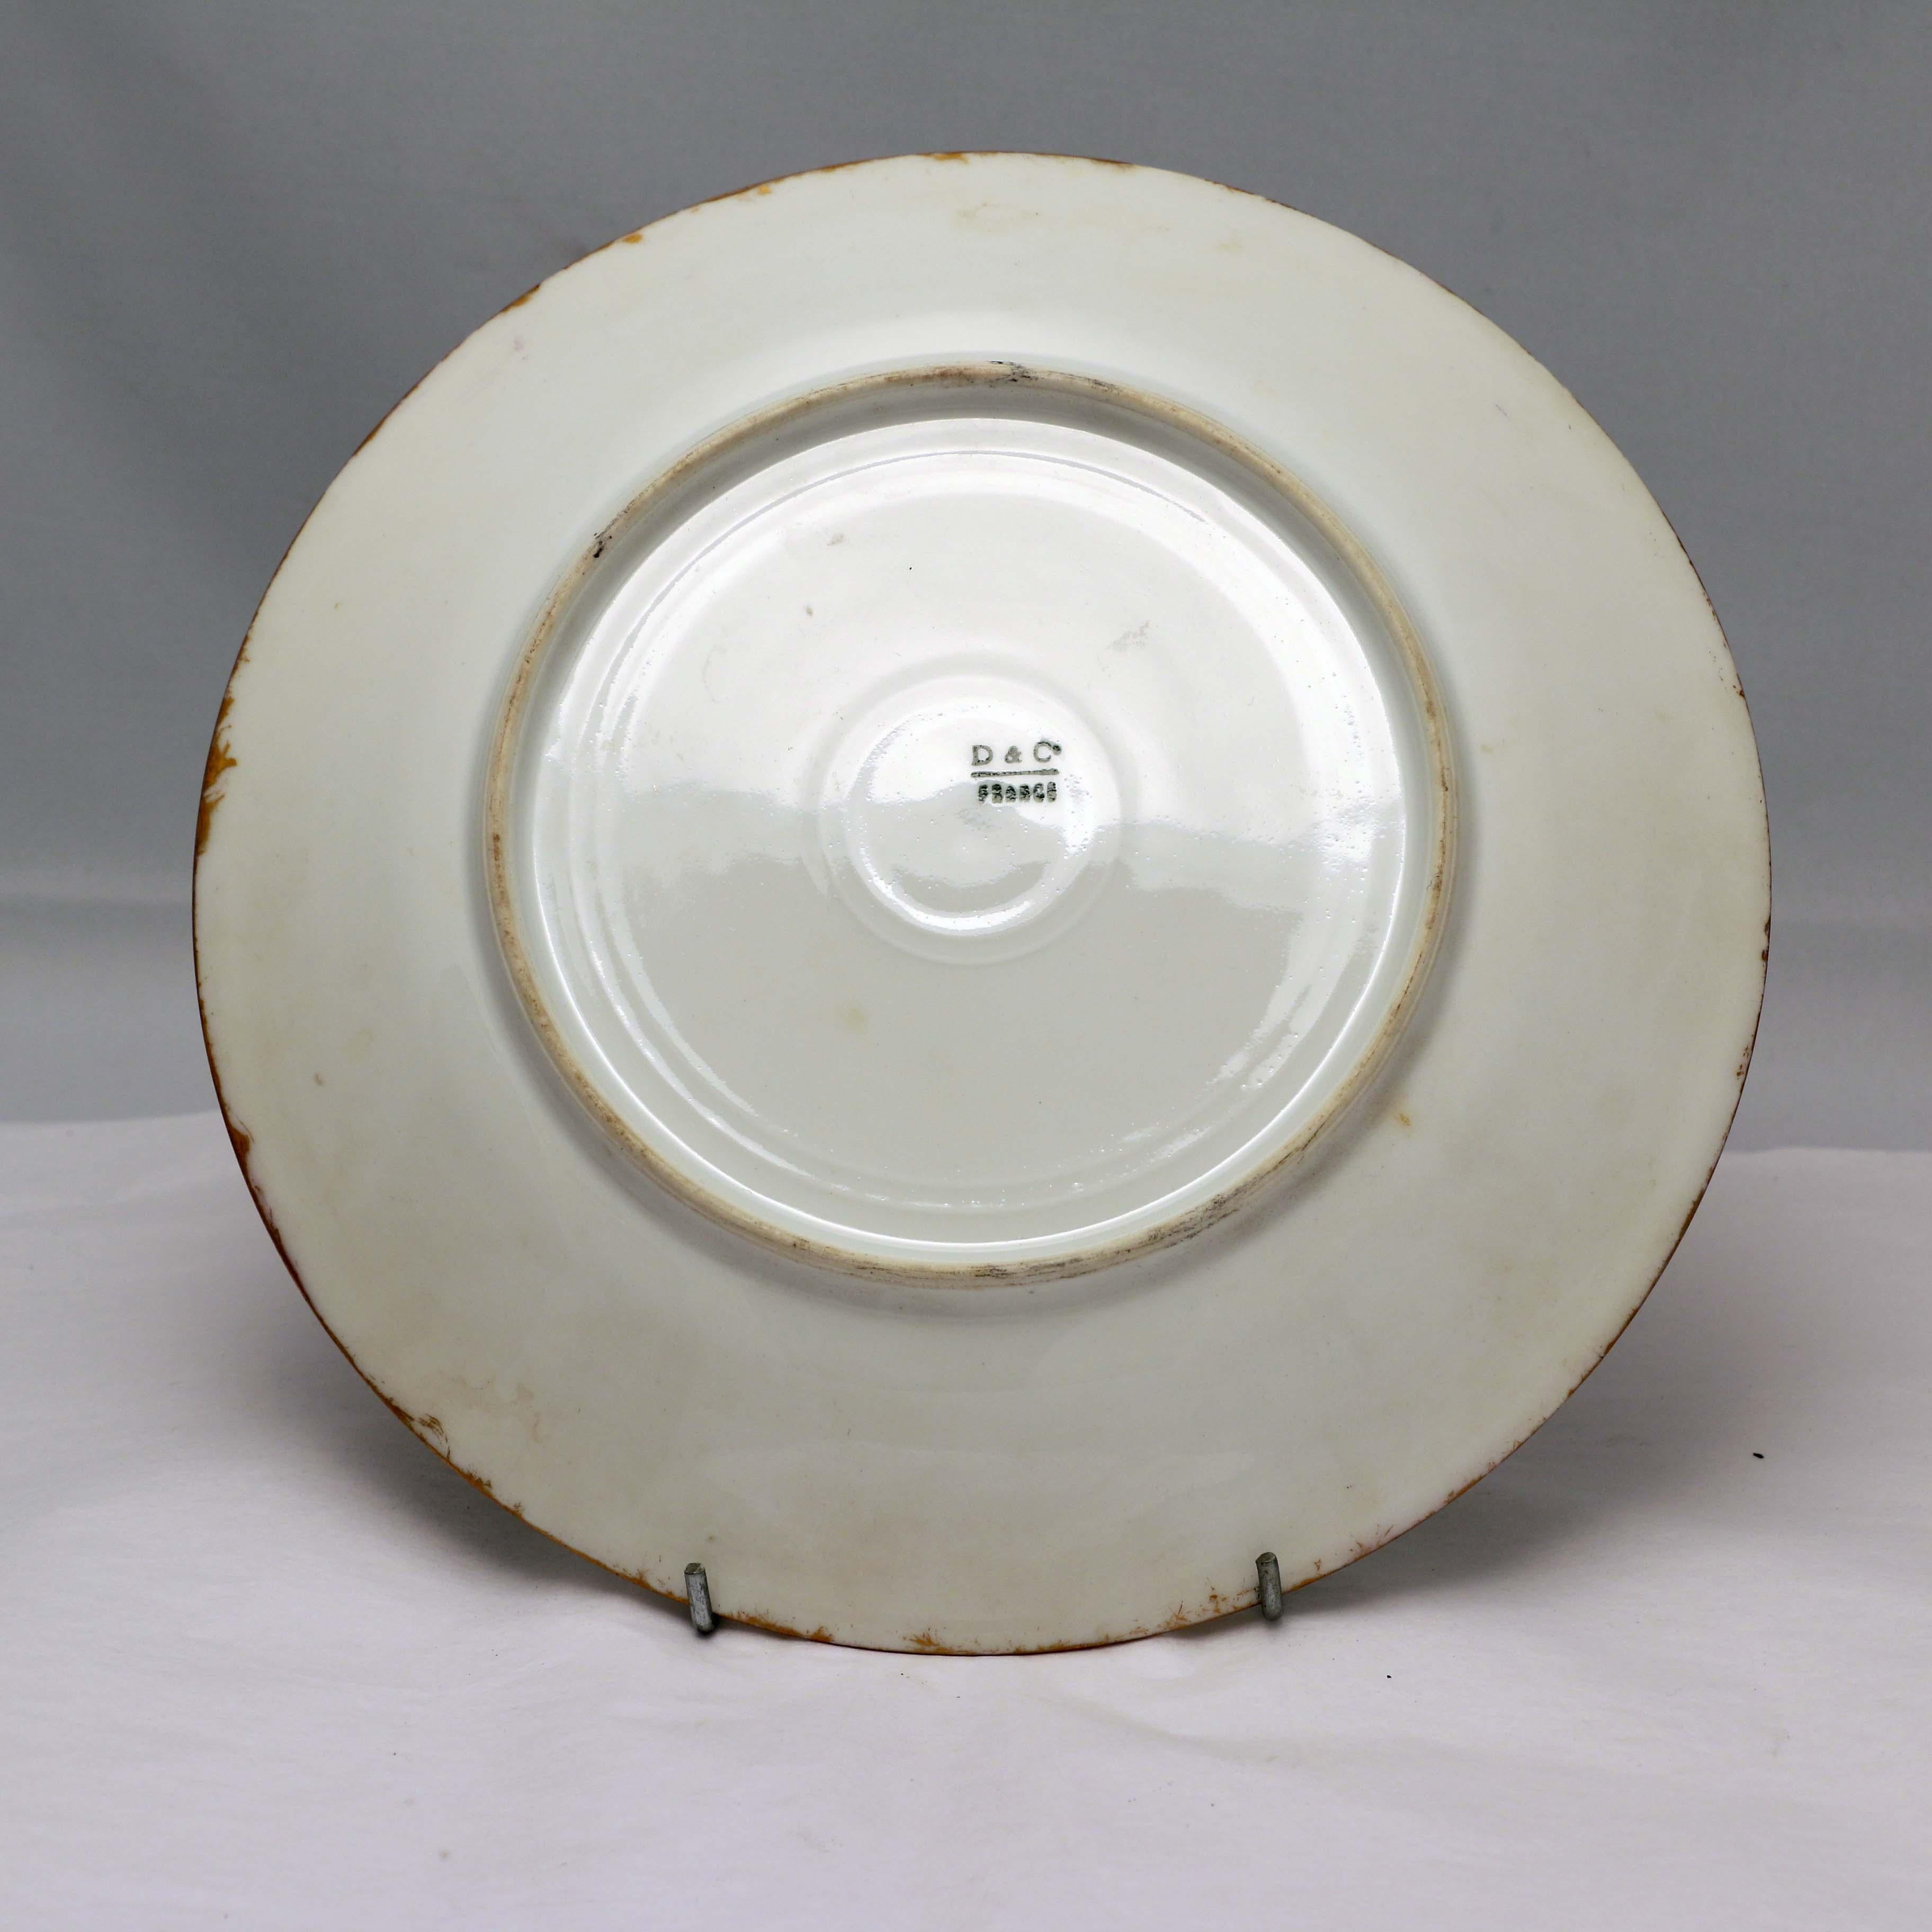 Set of 12 D&C Limoges Plates Painted with Shells 4